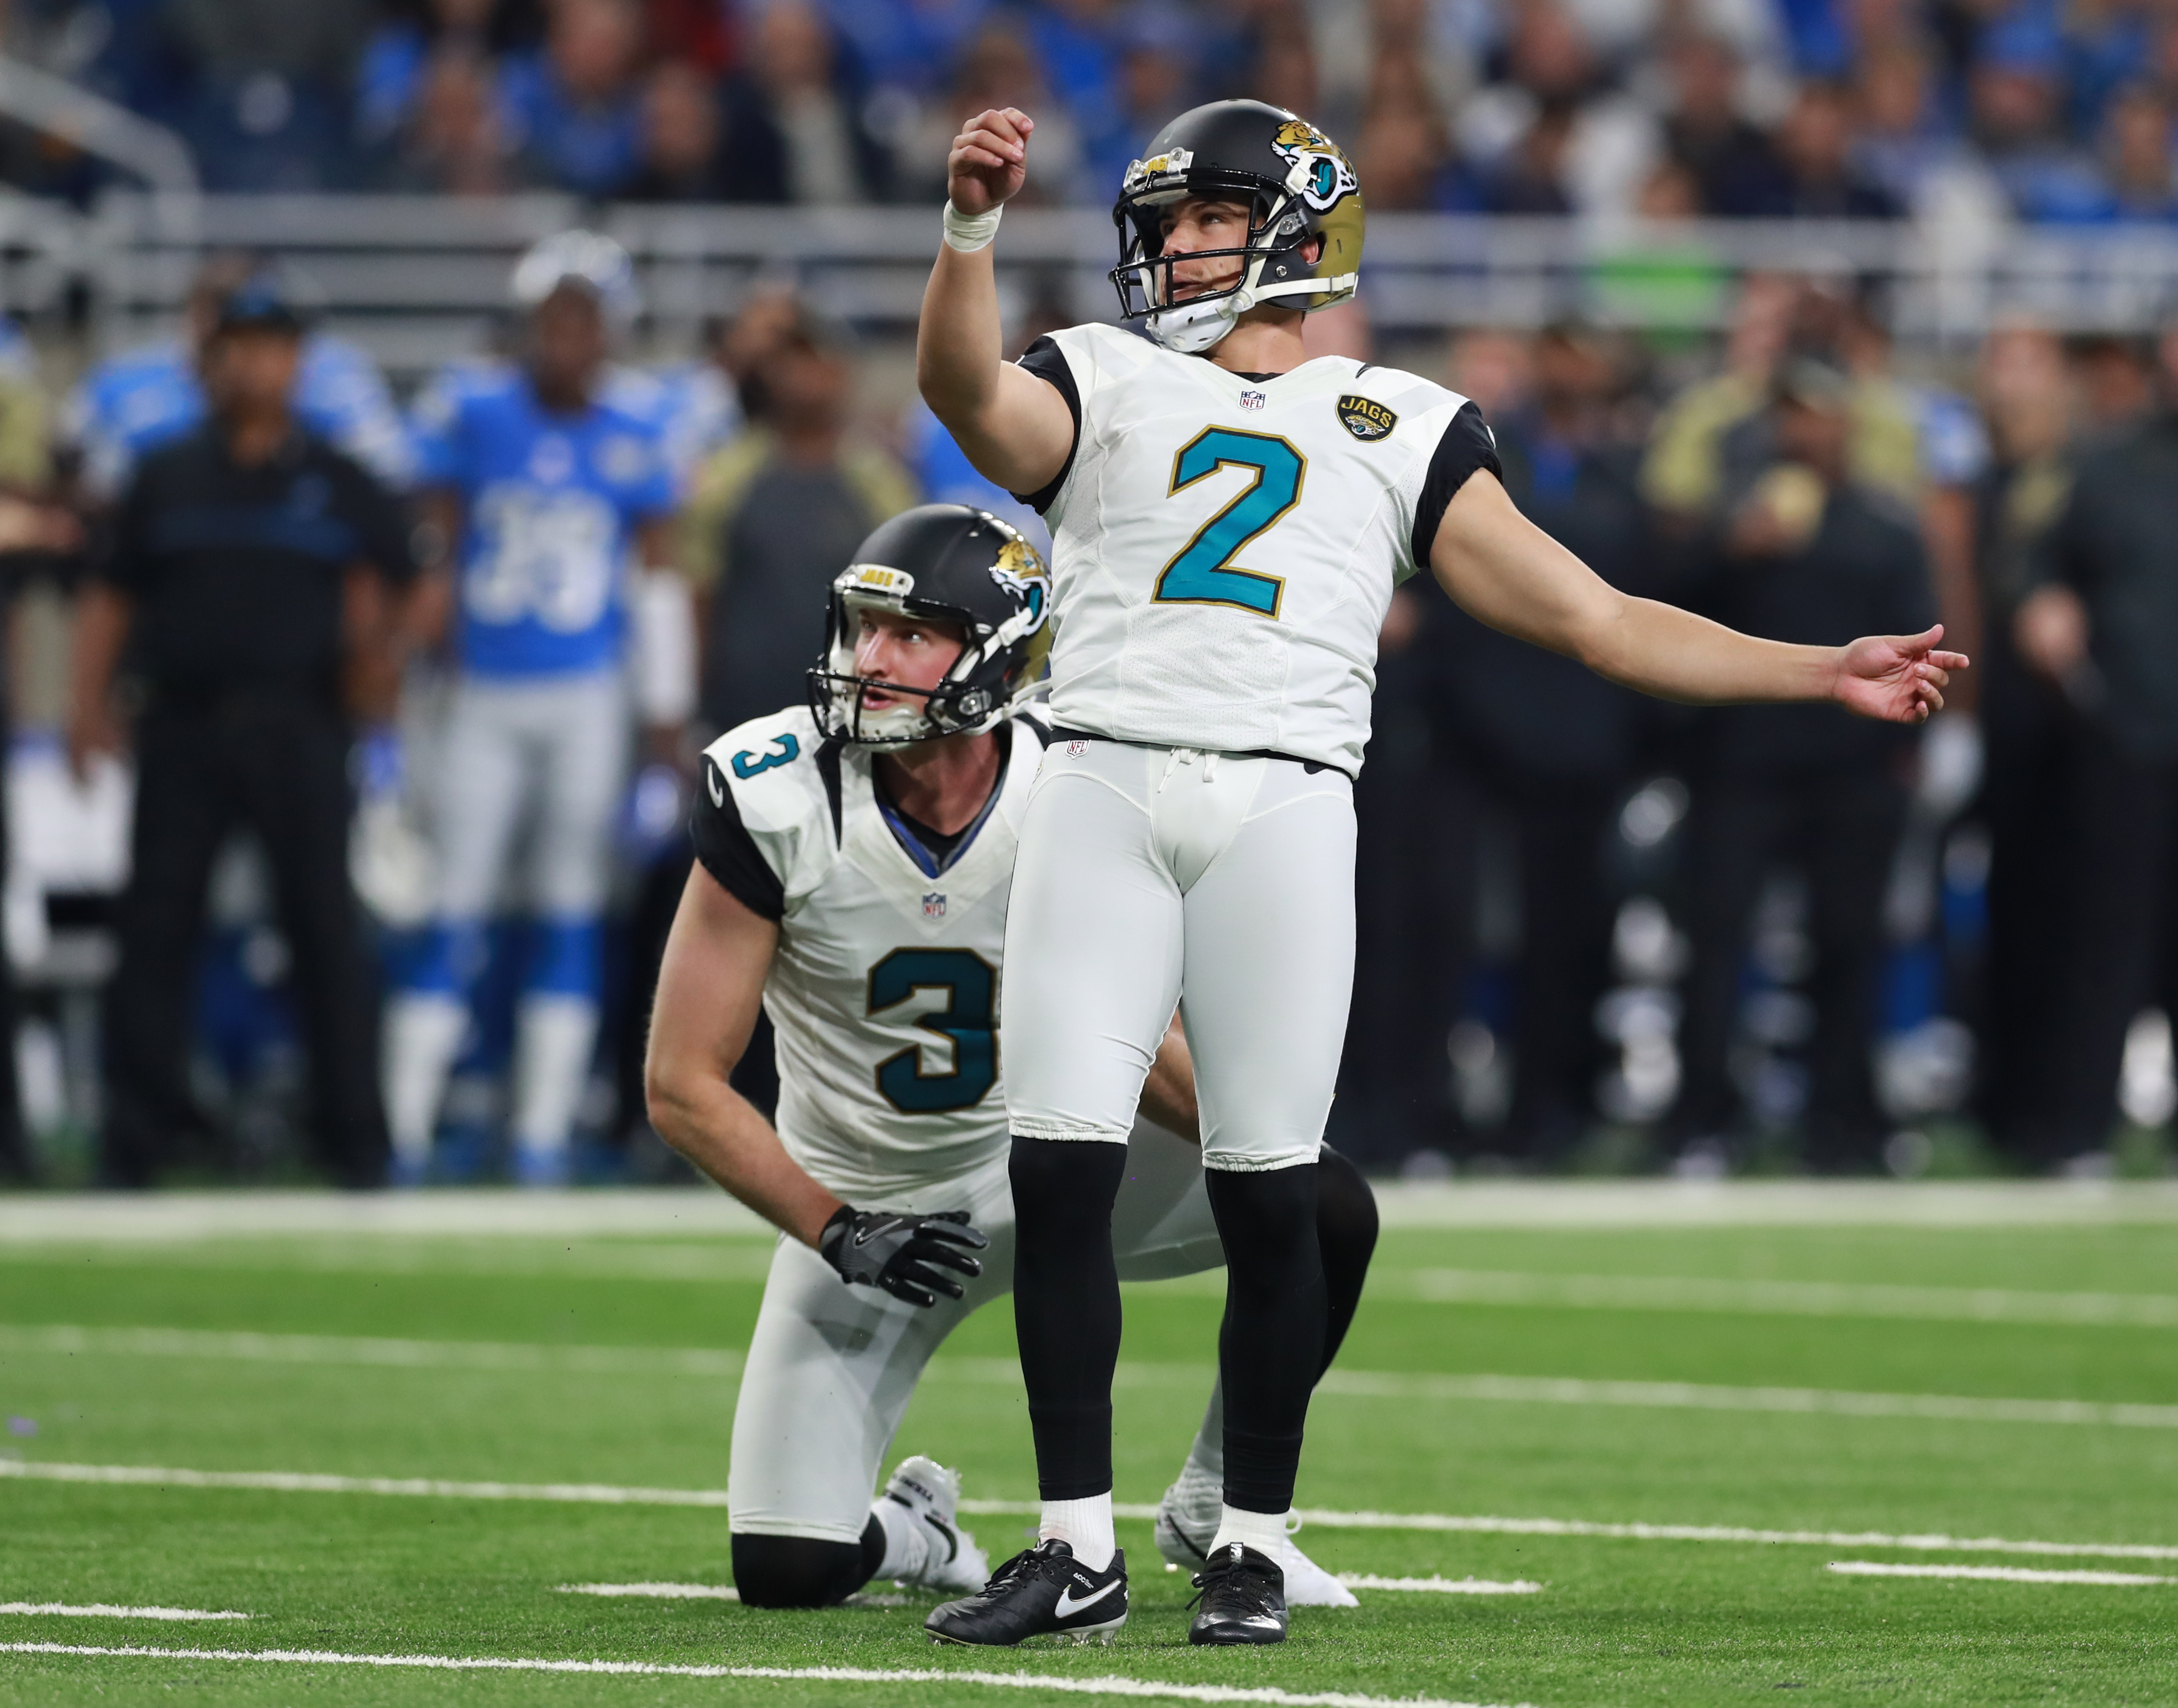 Why are NFL kickers missing so many extra points? | The Daily Dolphin